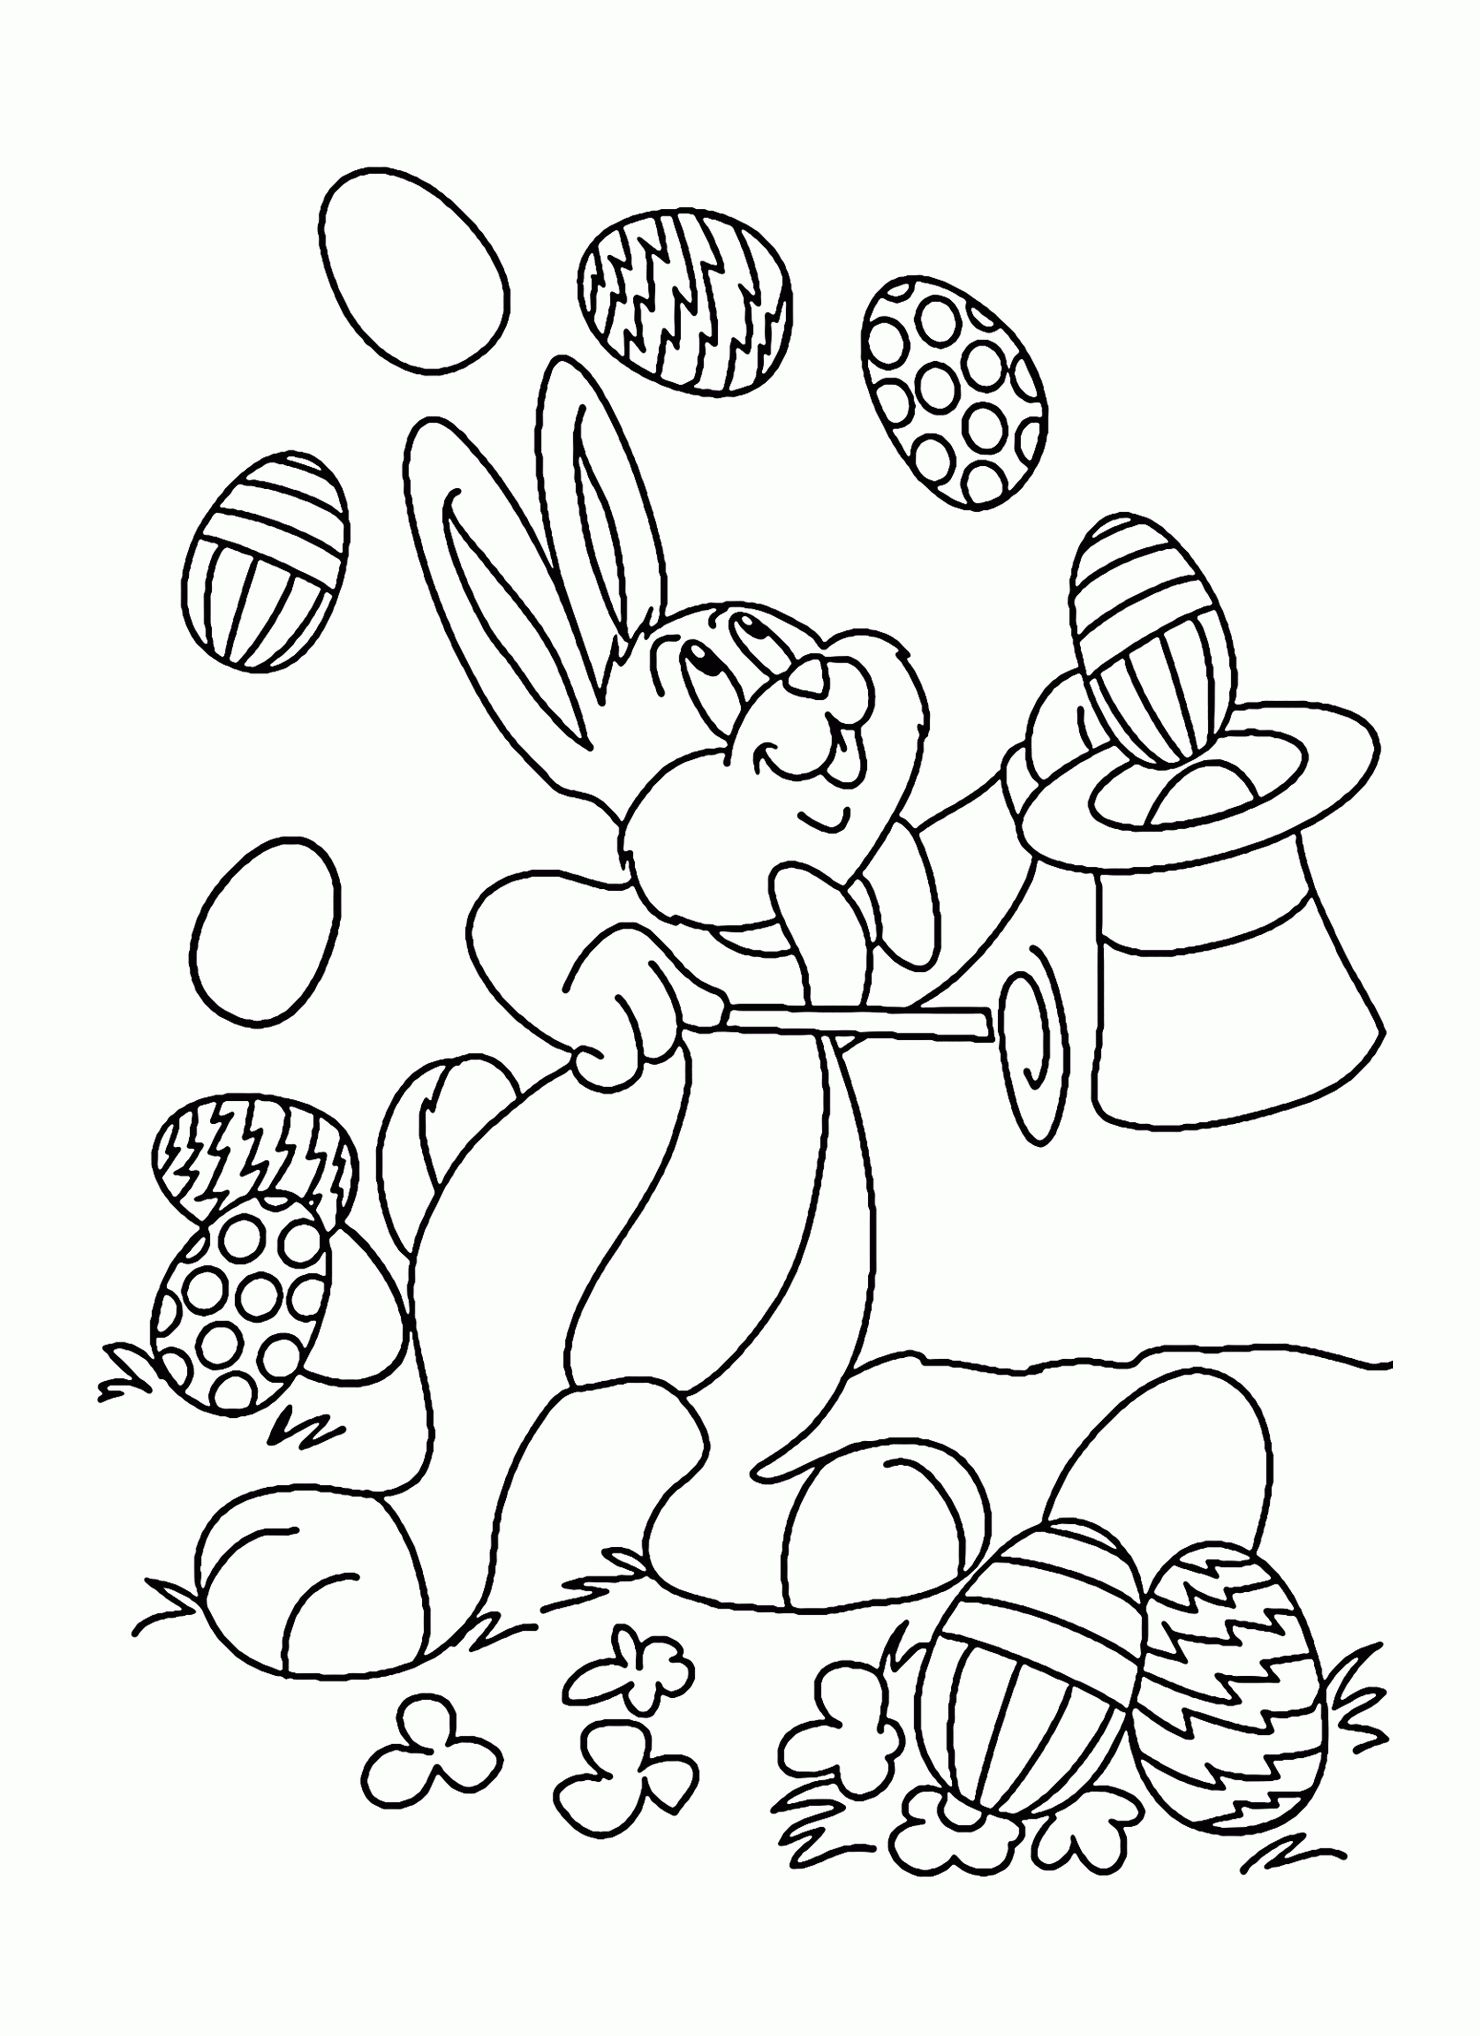 15 Printable Easter Coloring Pages - Holiday Vault